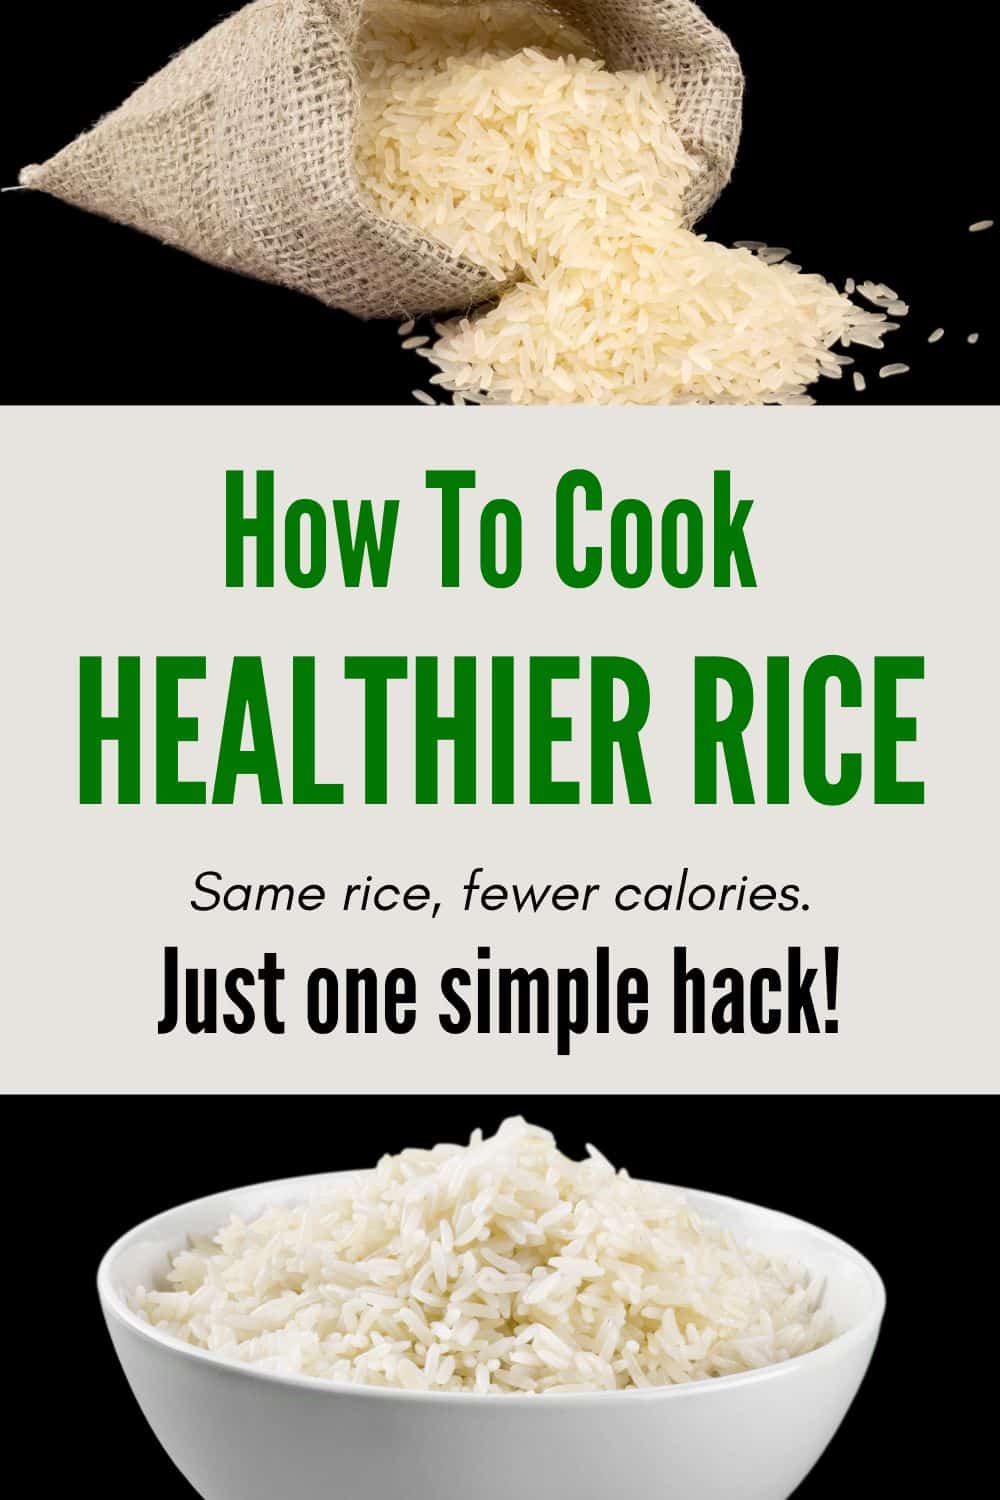 How to Cook Healthier Rice - One Simple Hack!